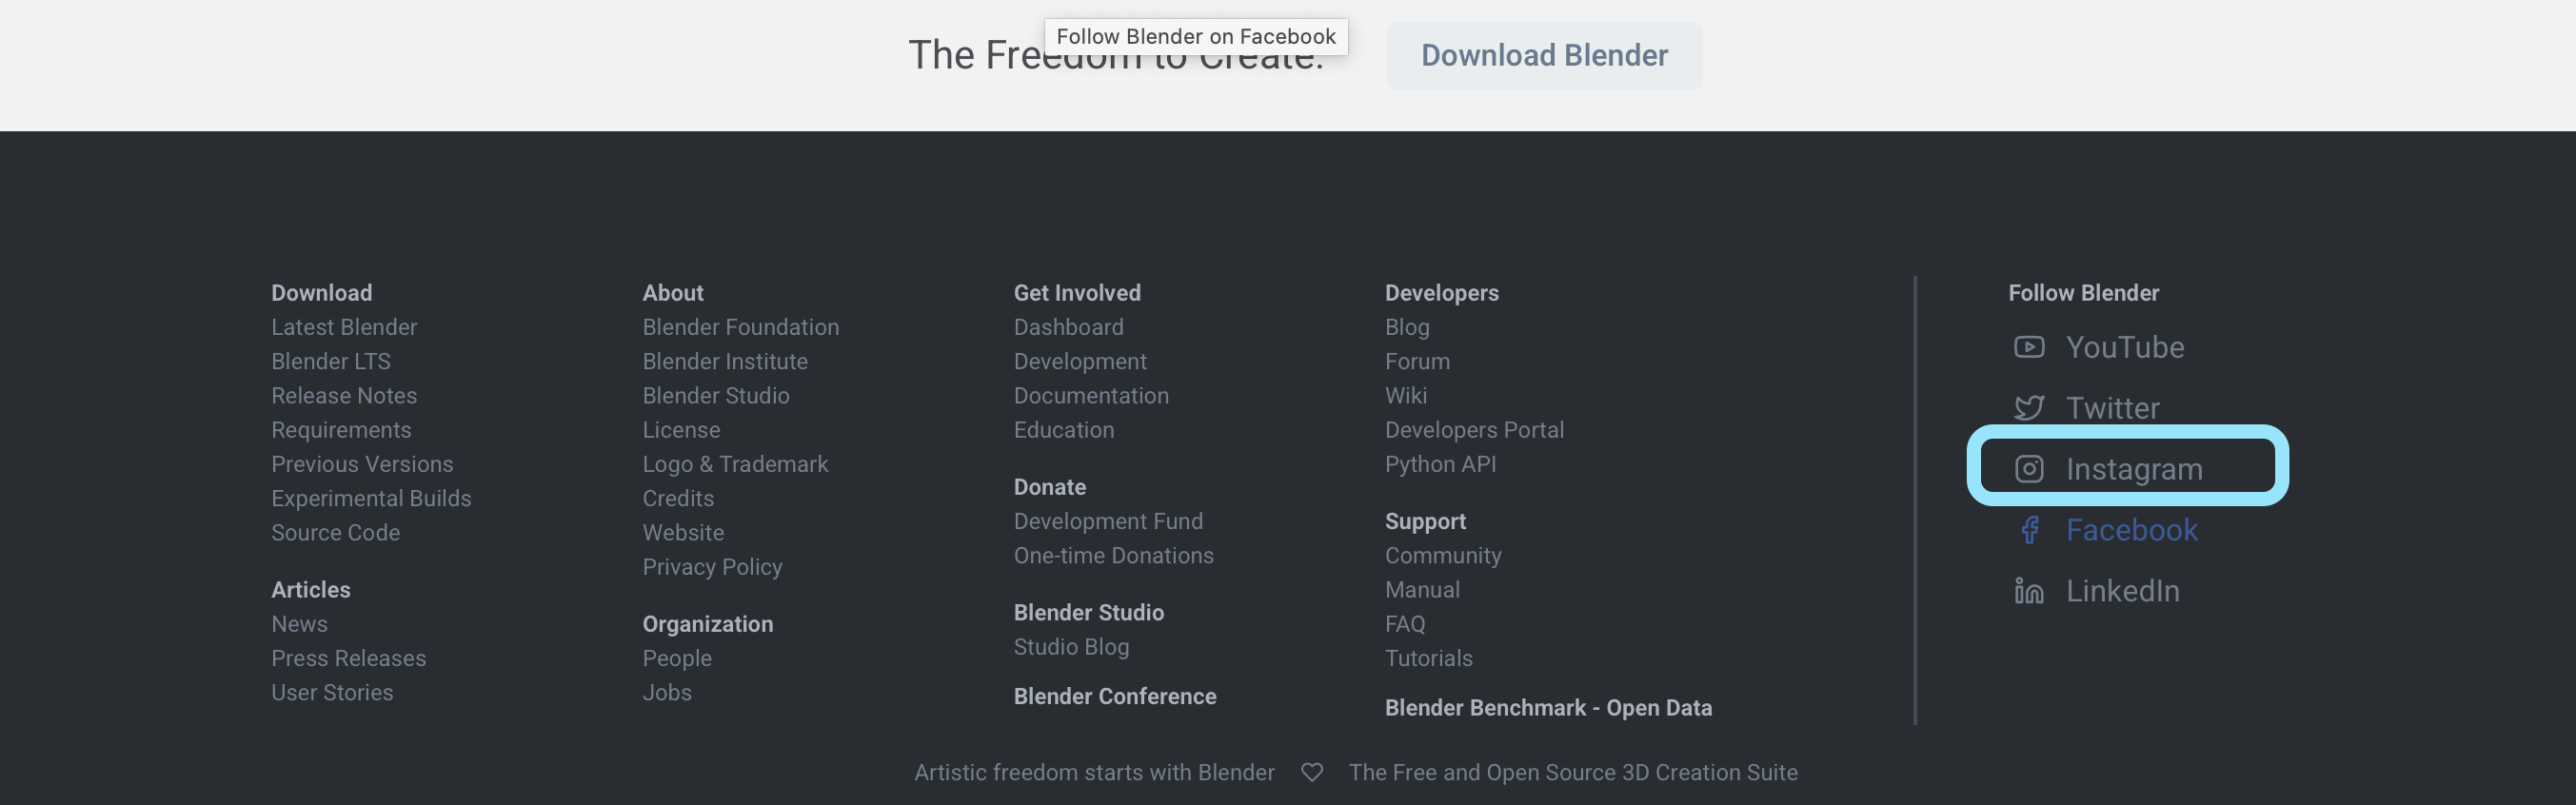 Blender home page footer